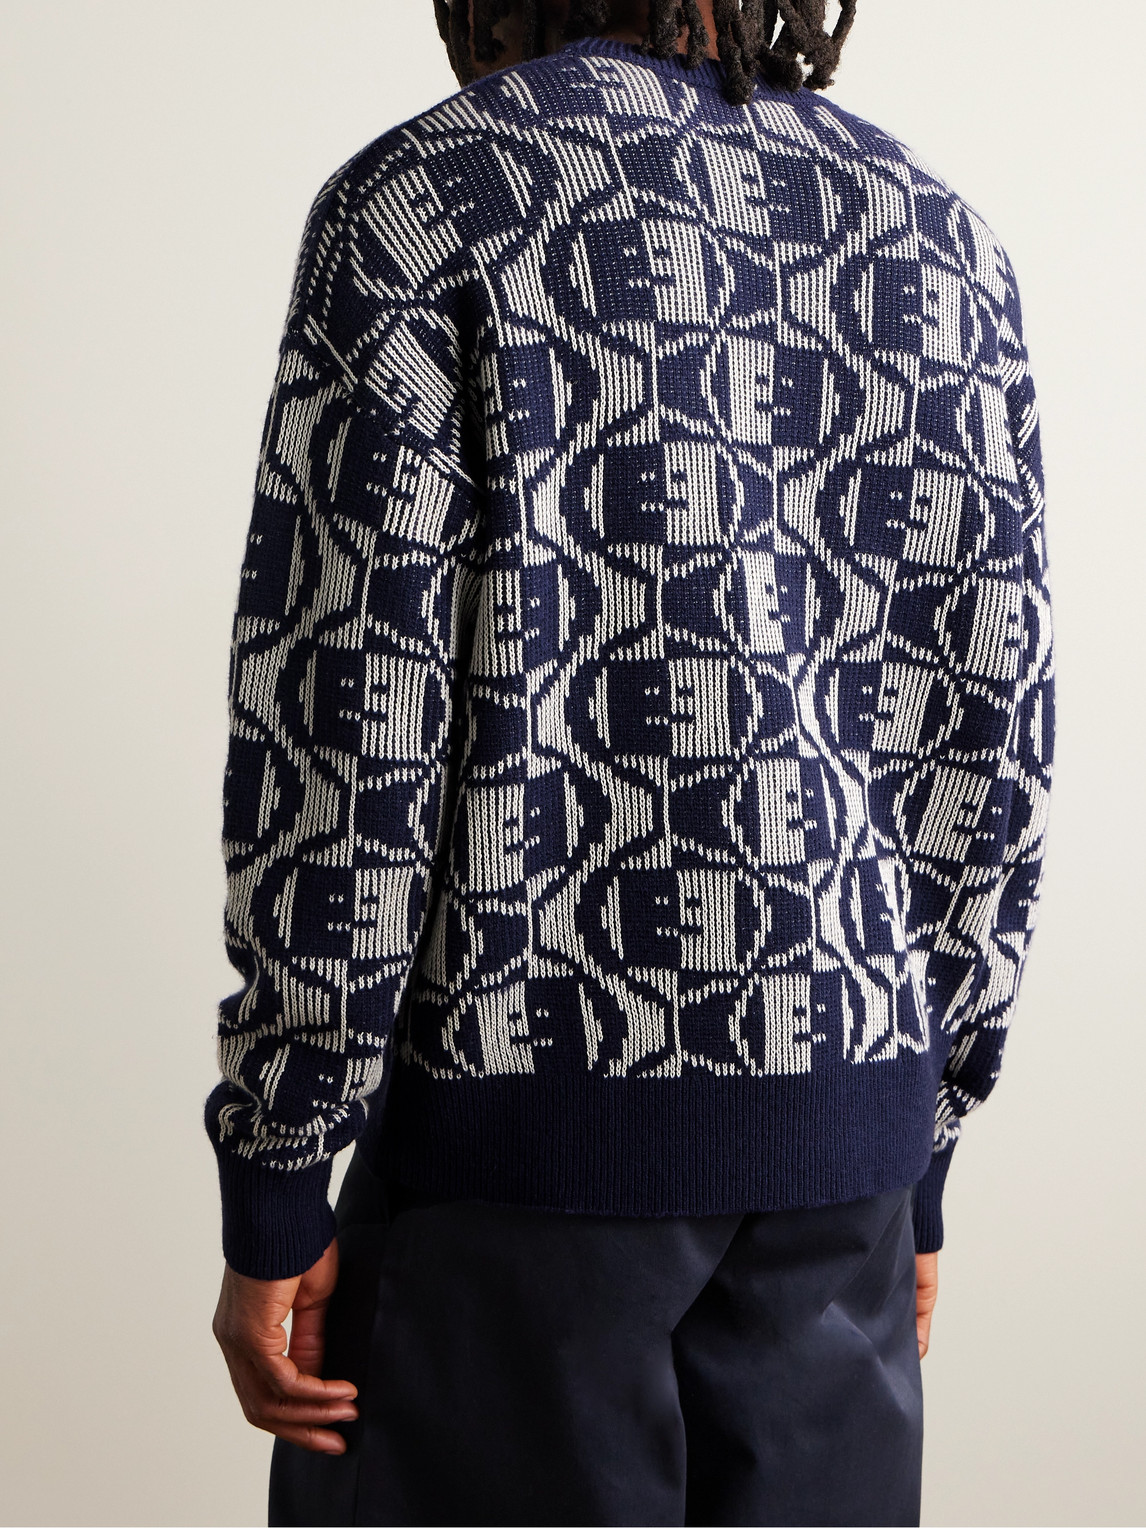 Shop Acne Studios Katch Wool And Cotton-blend Jacquard-knit Sweater In Blue